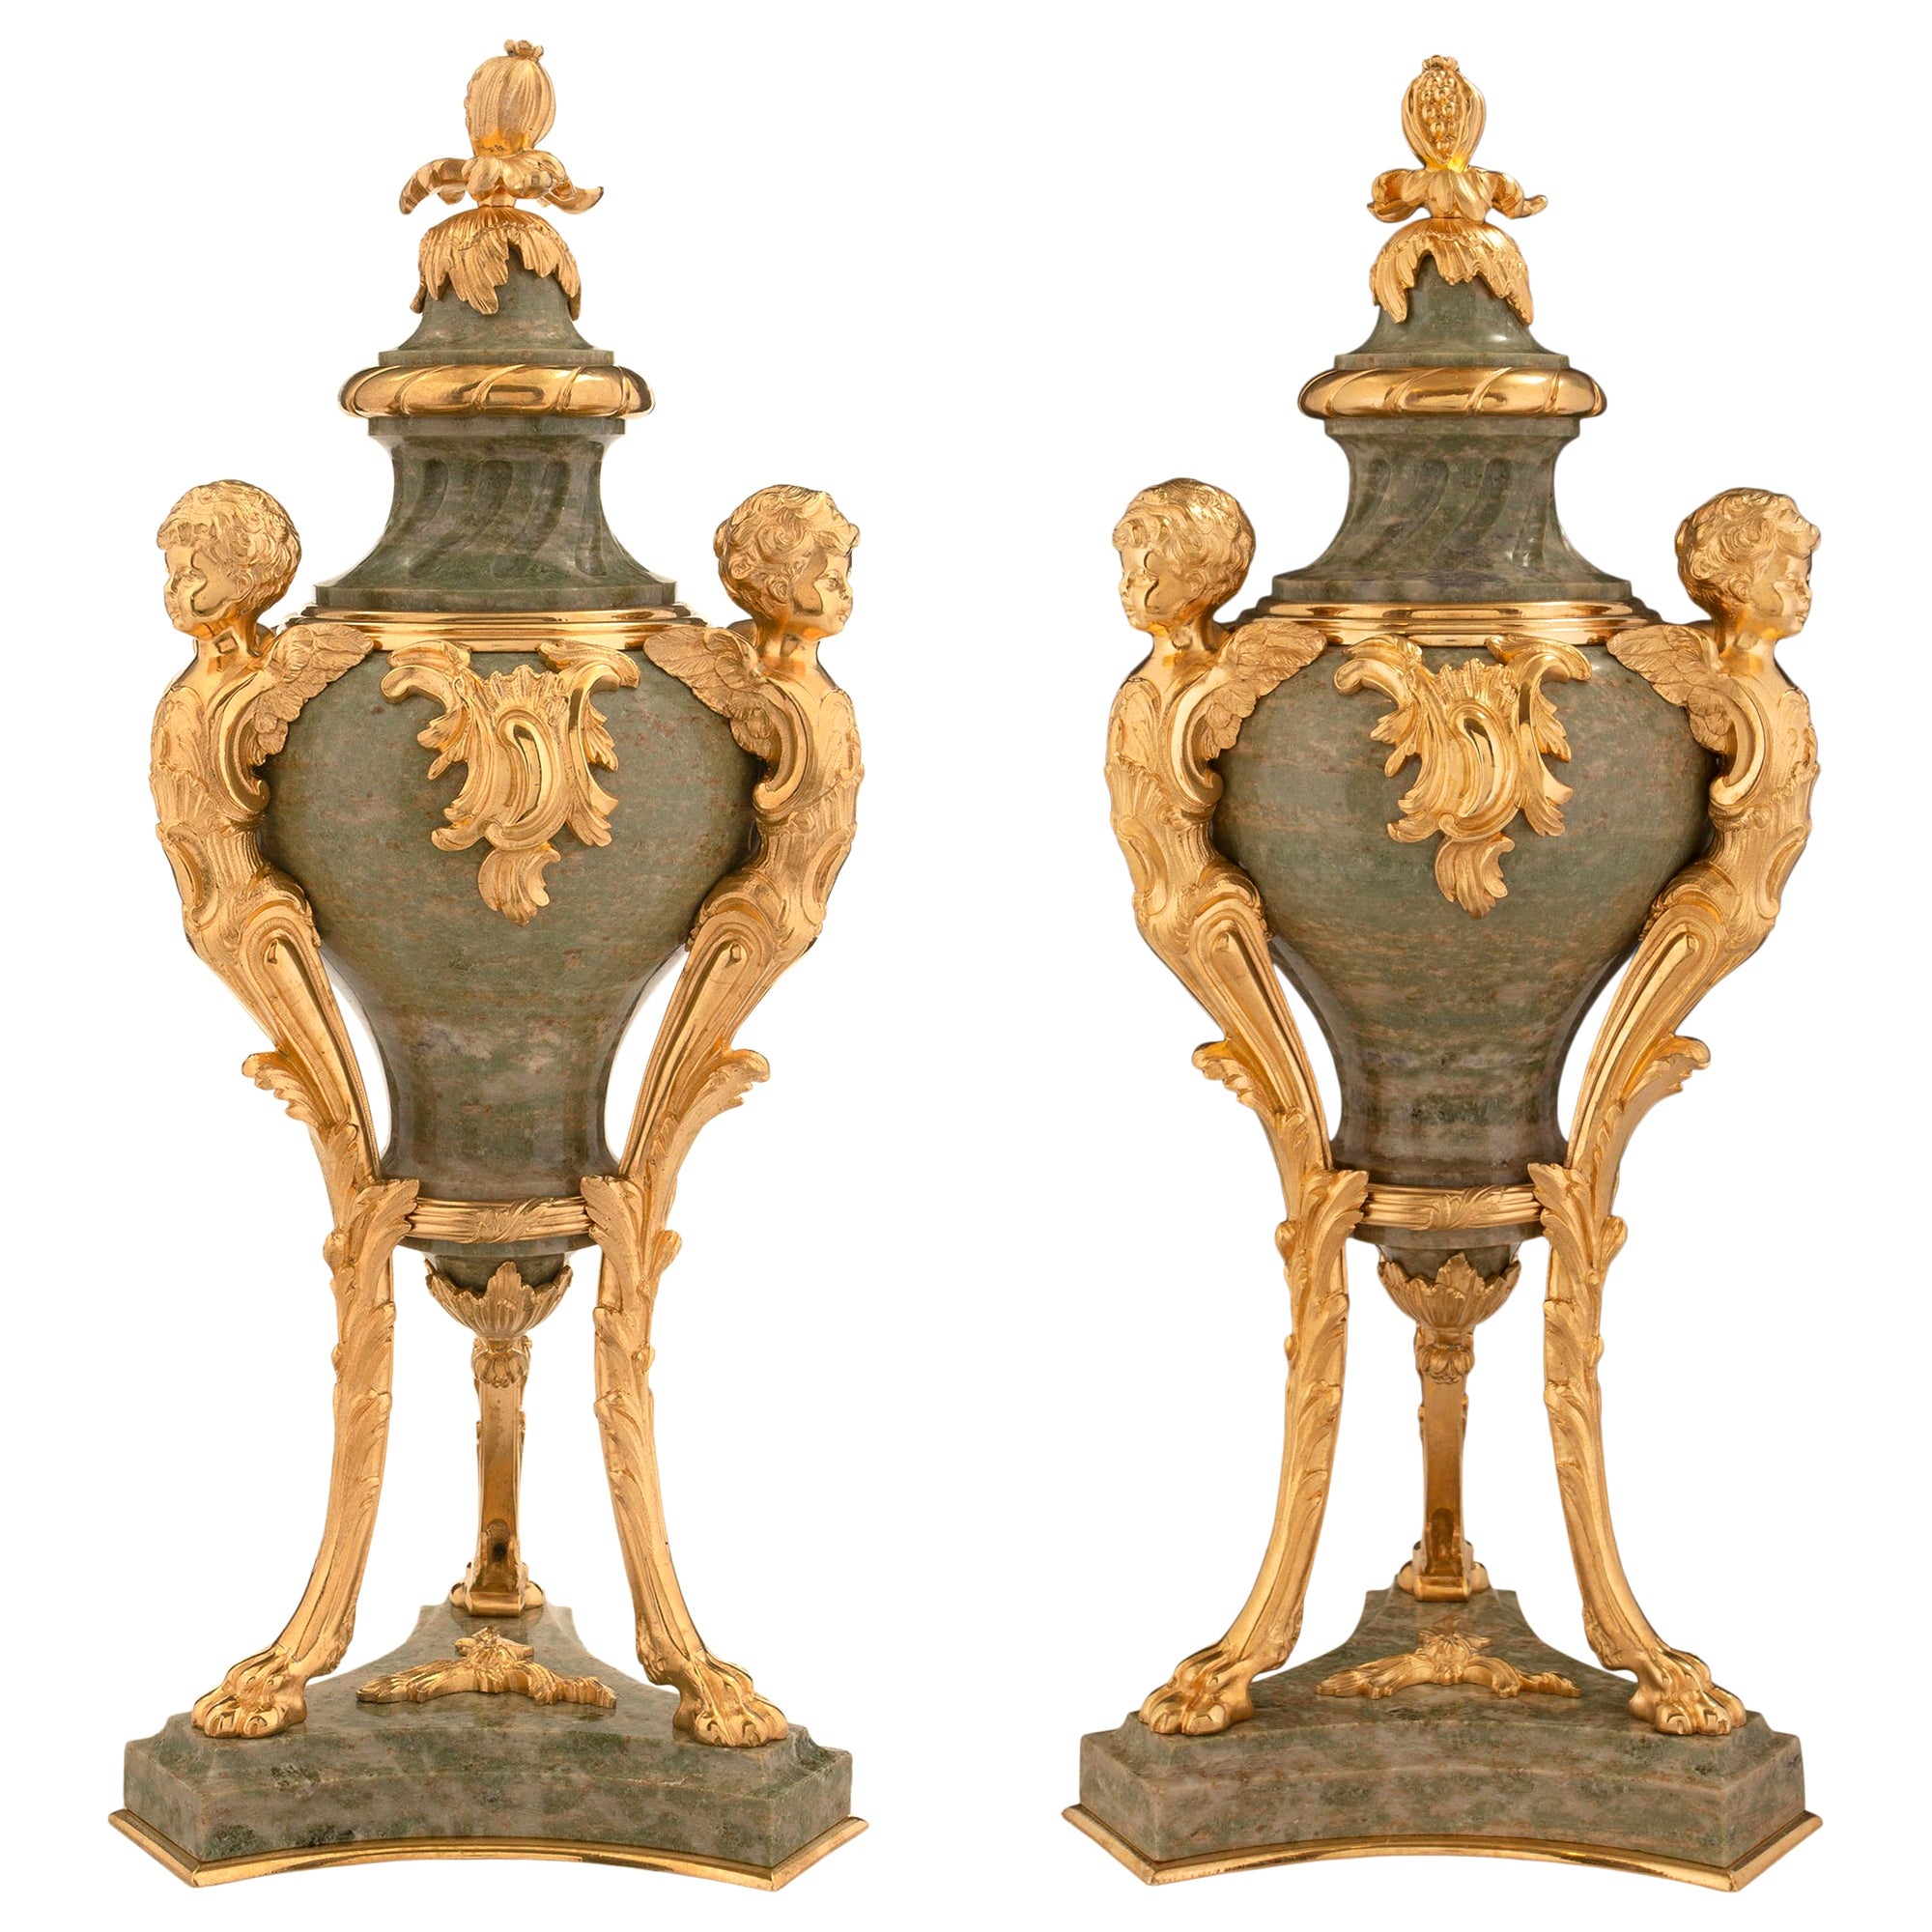 Pair of French 19th Century Louis XVI Style Green Marble and Ormolu Lidded Urns For Sale